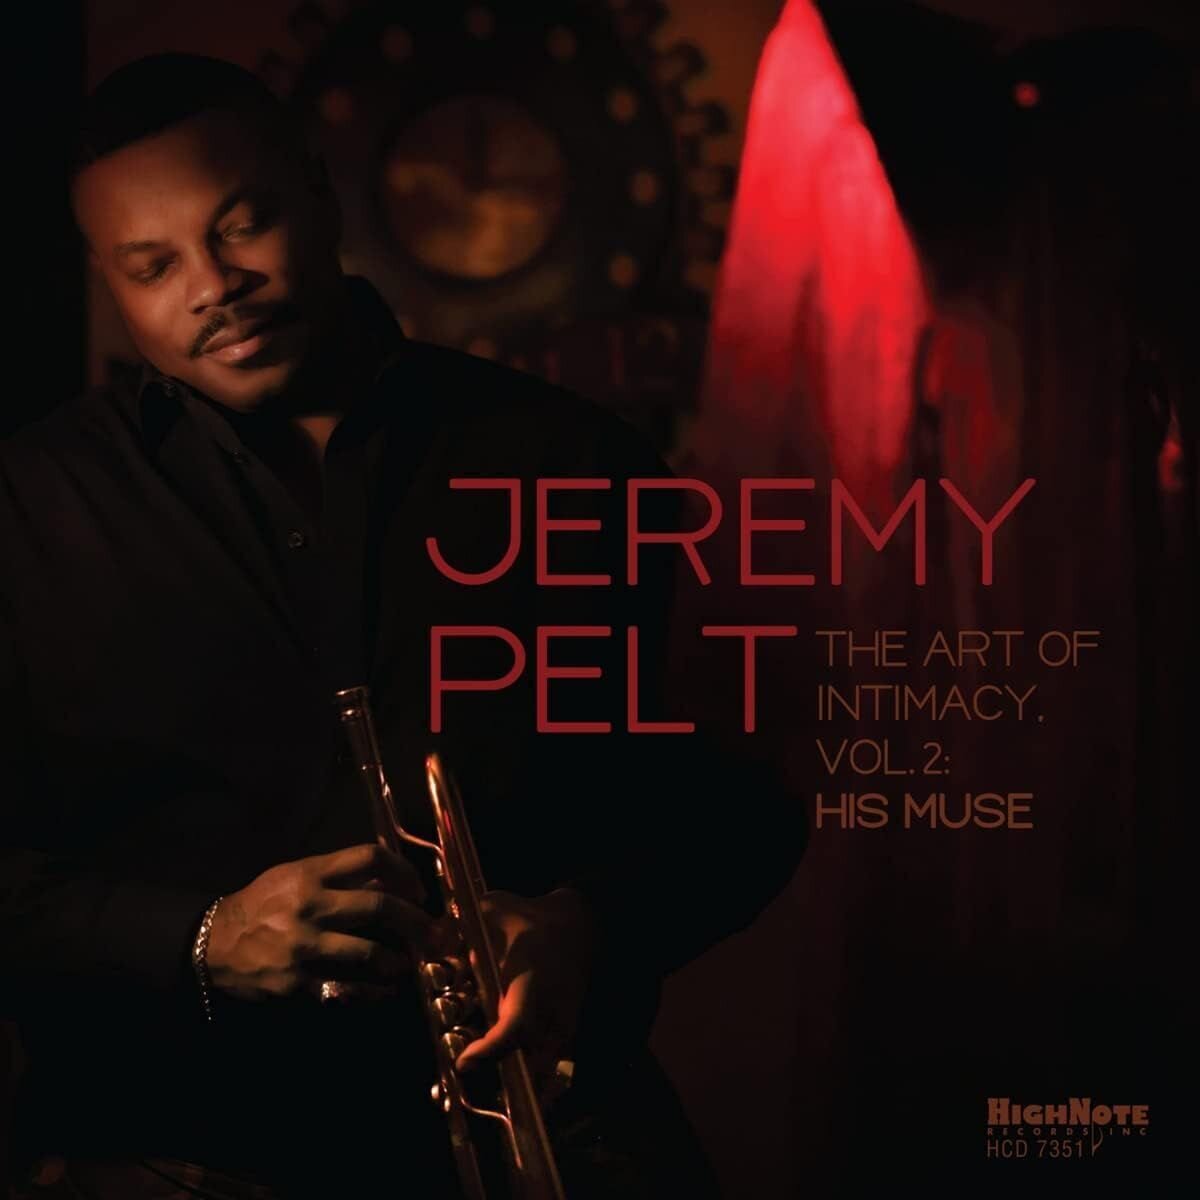 JEREMY PELT - The Art Of Intimacy Vol. 2 His Muse